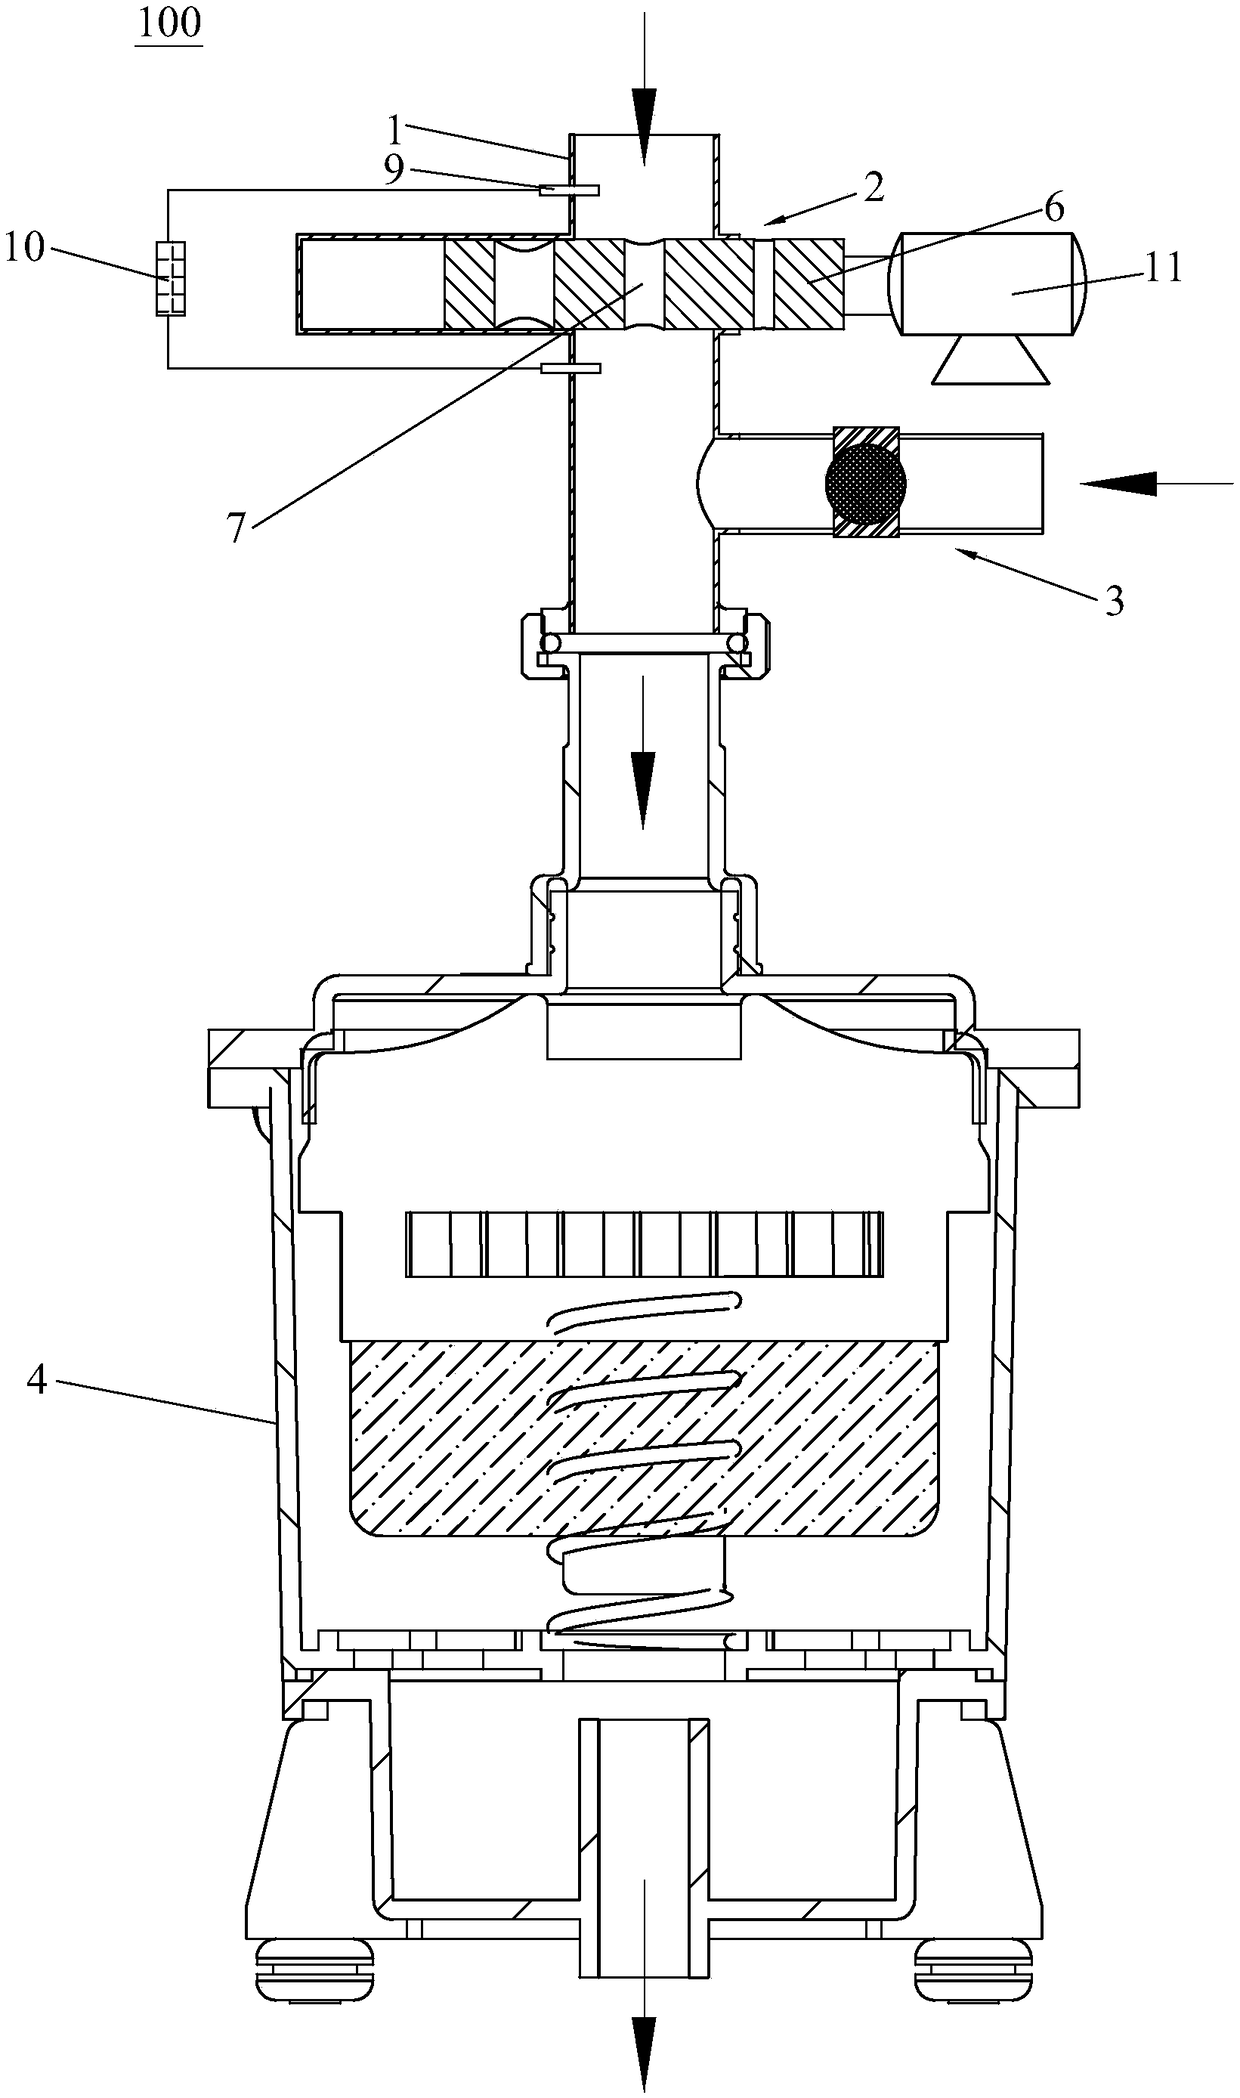 Portable air sampler with wide range